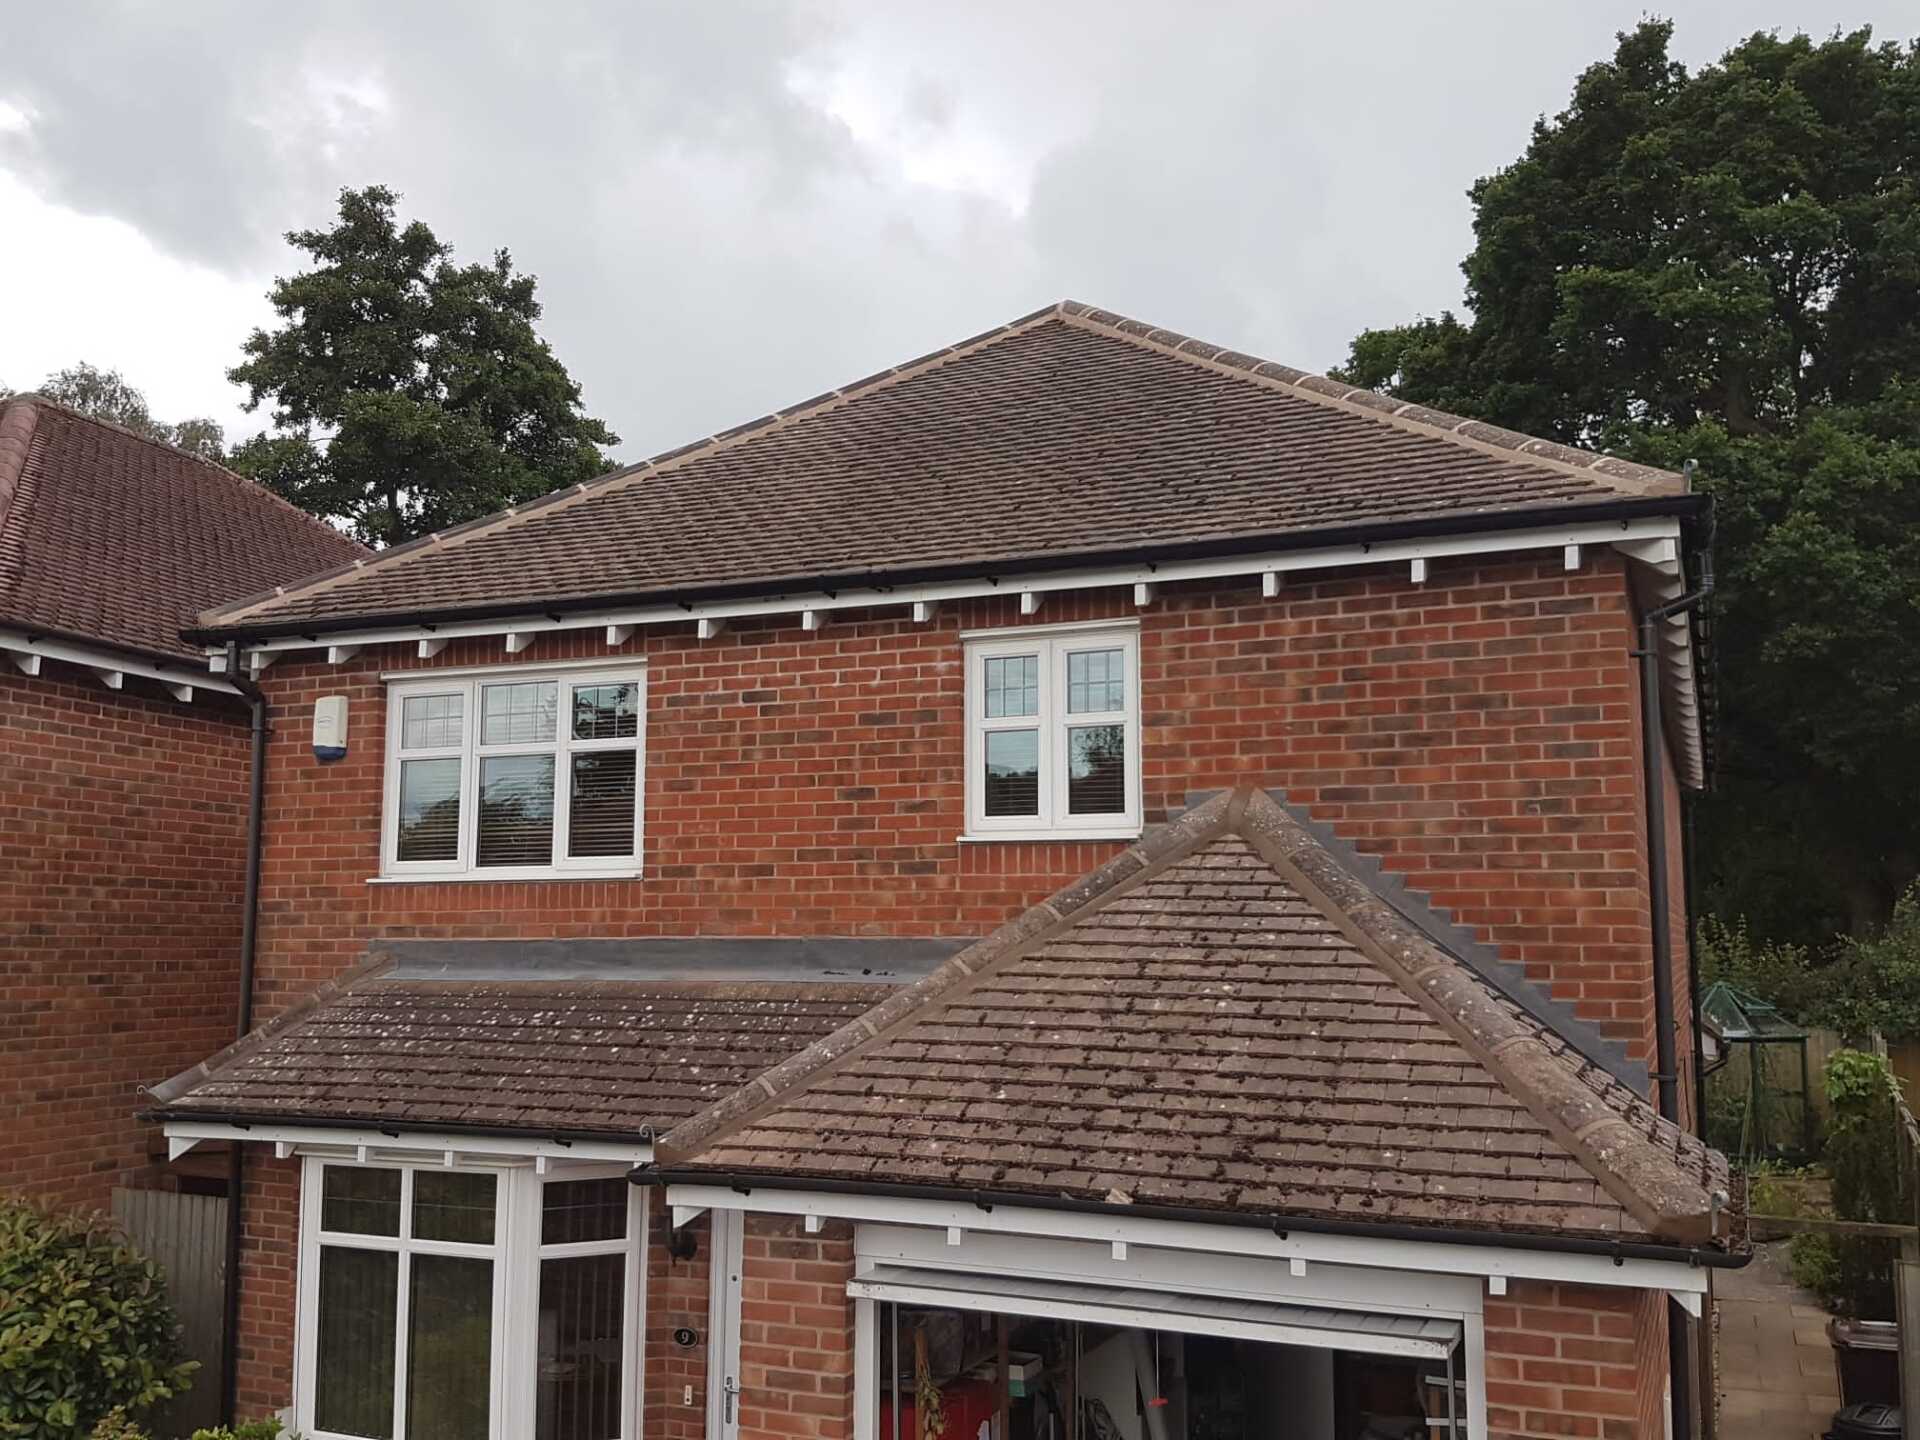 N.Bird Roofing - Professional Roofers Solihull